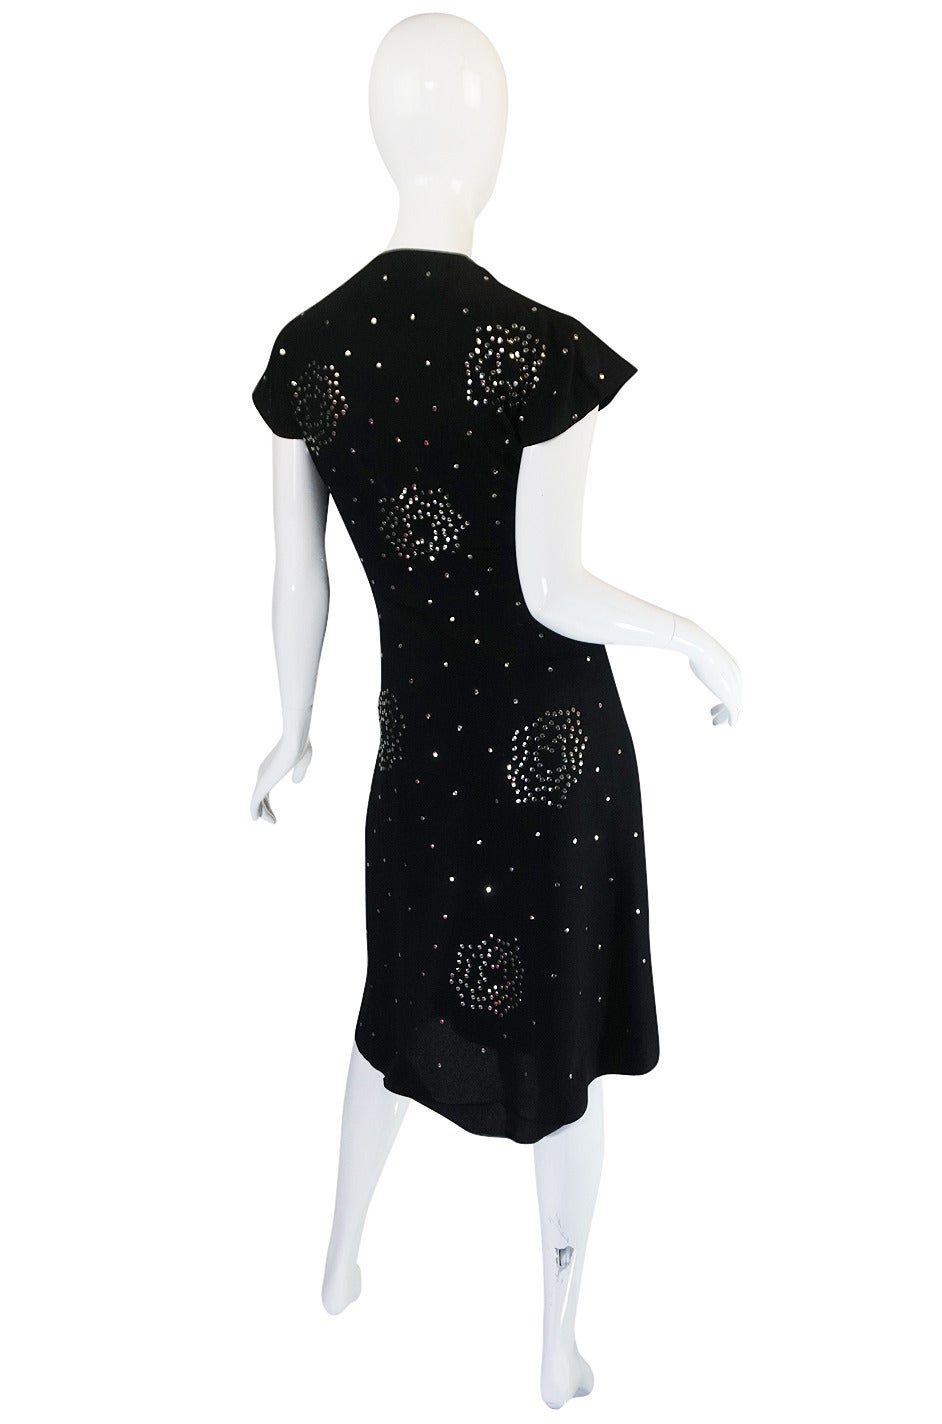 These studded dresses from the 1940s are almost impossible to find and often examples have just a minor detailing of stud work. This one however is like the holy grail as it is completely covered in hand set, flat almost sequin like, silver studs